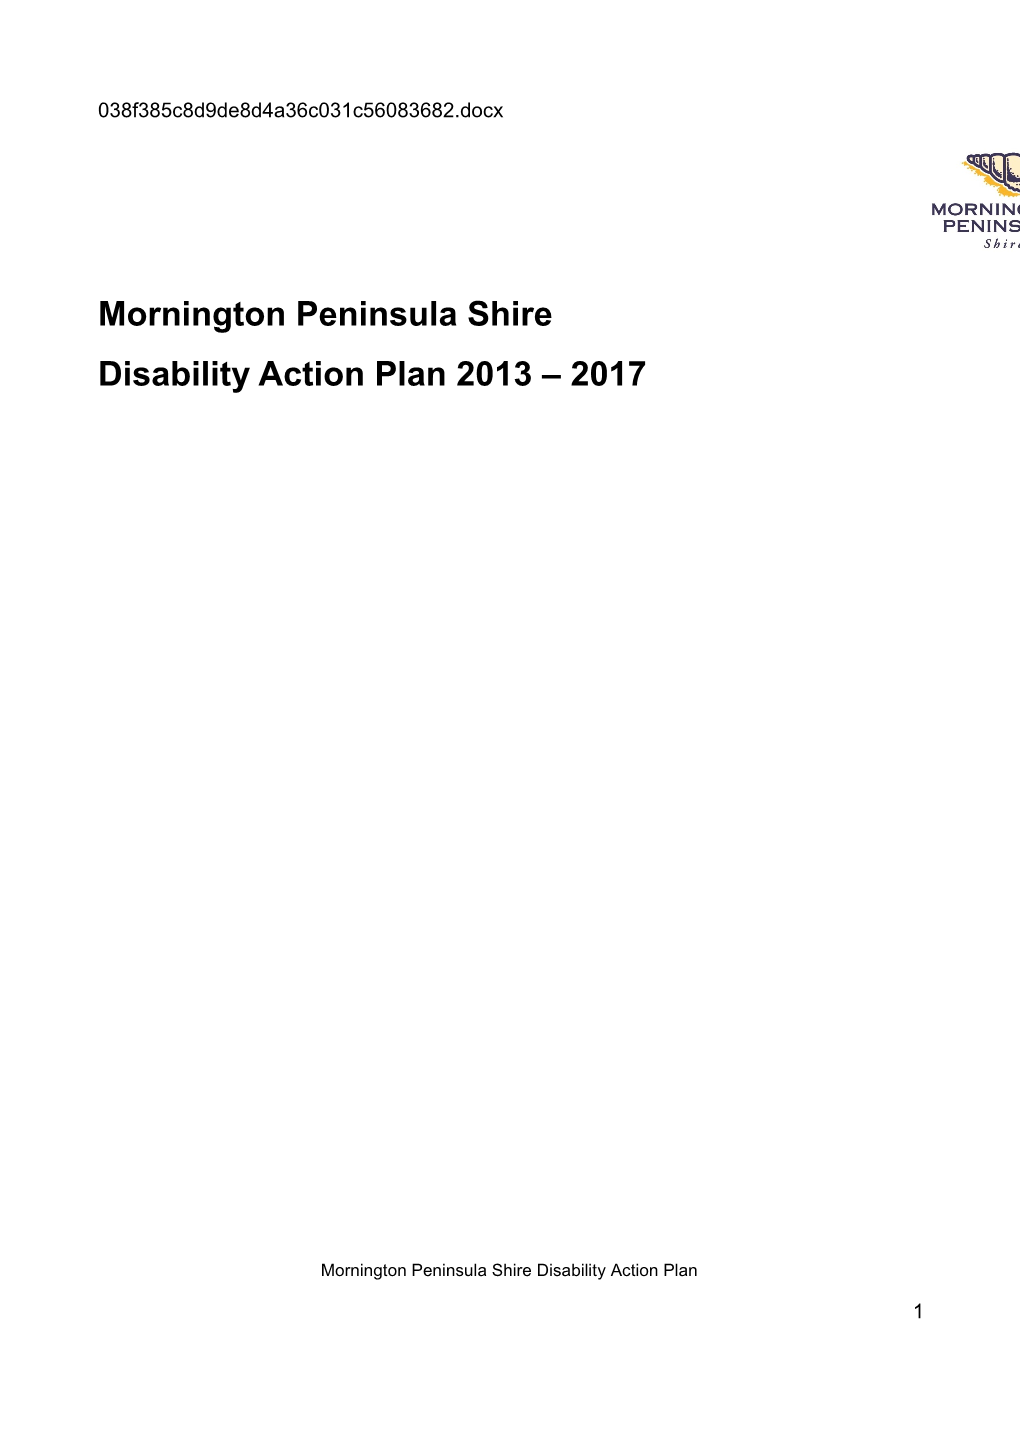 Disability Action Plan 2013 2017